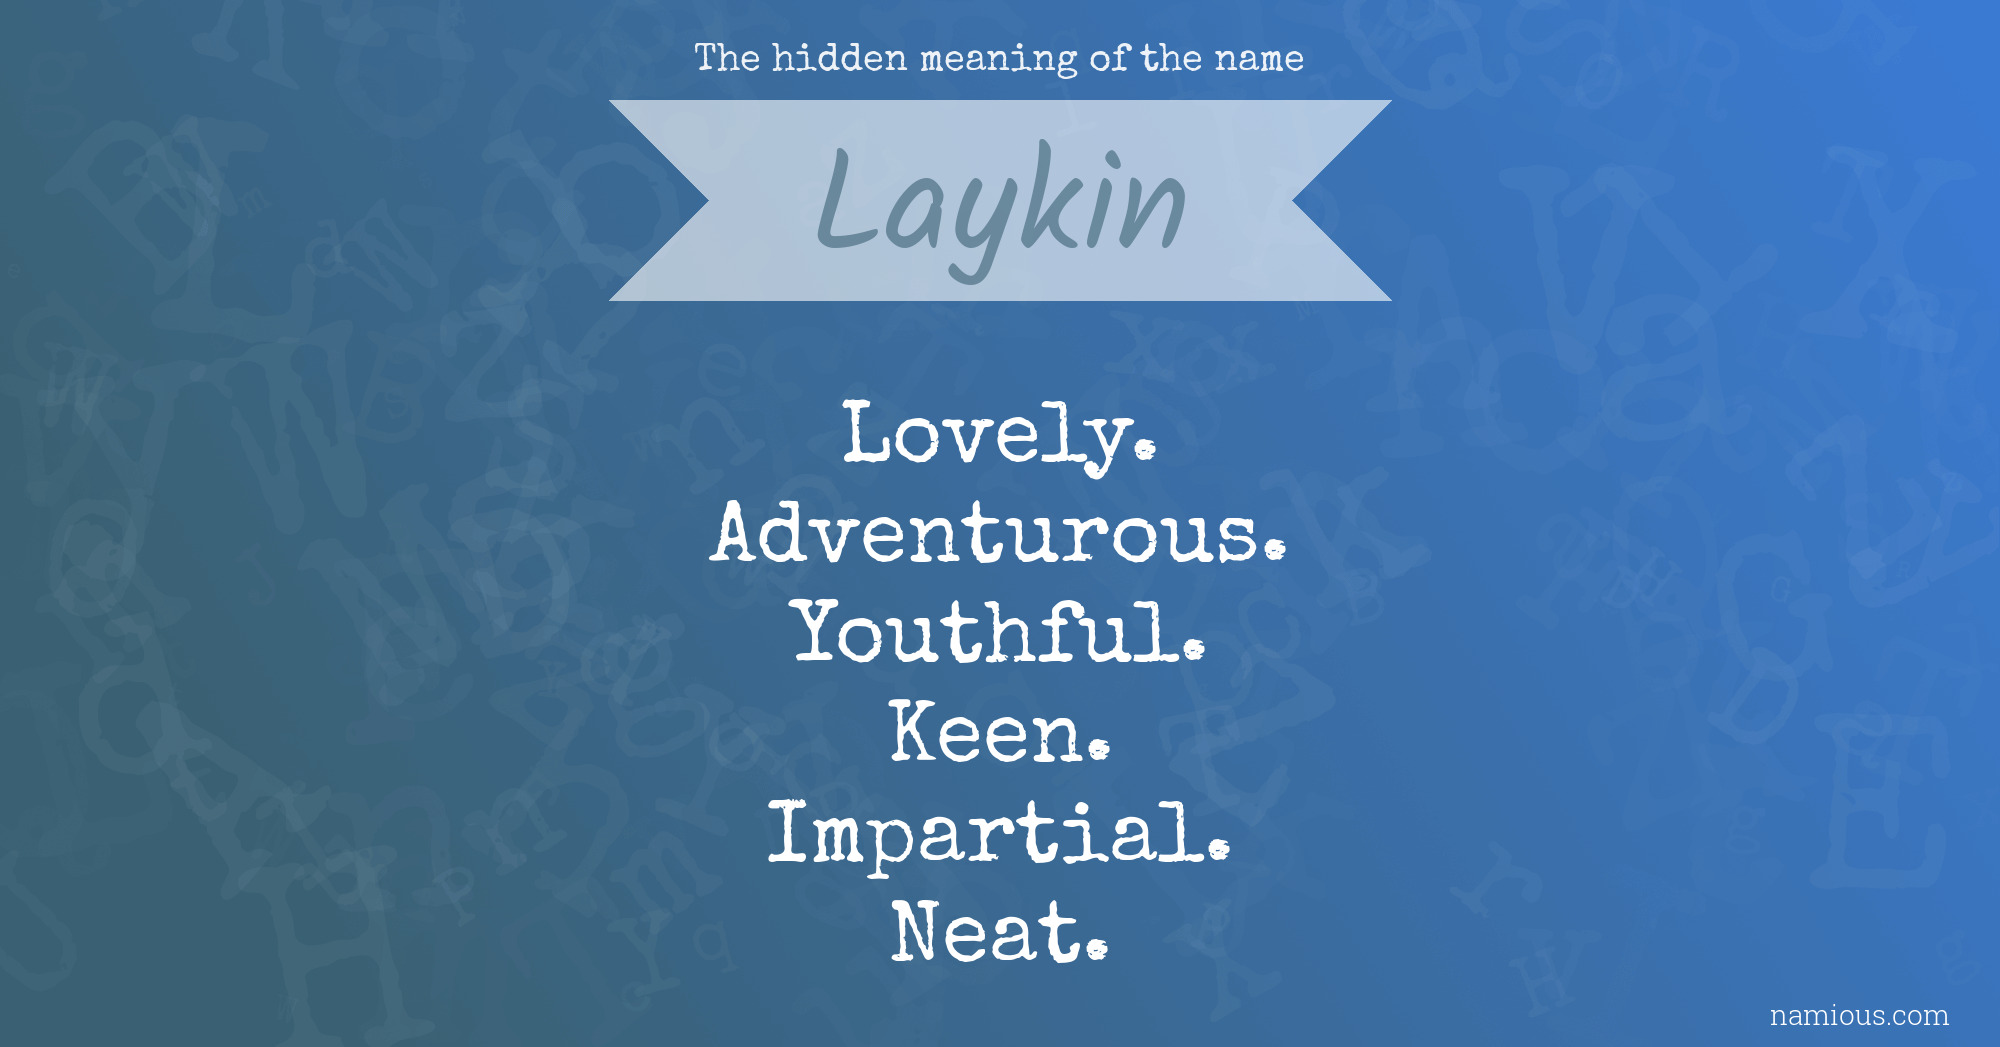 The hidden meaning of the name Laykin